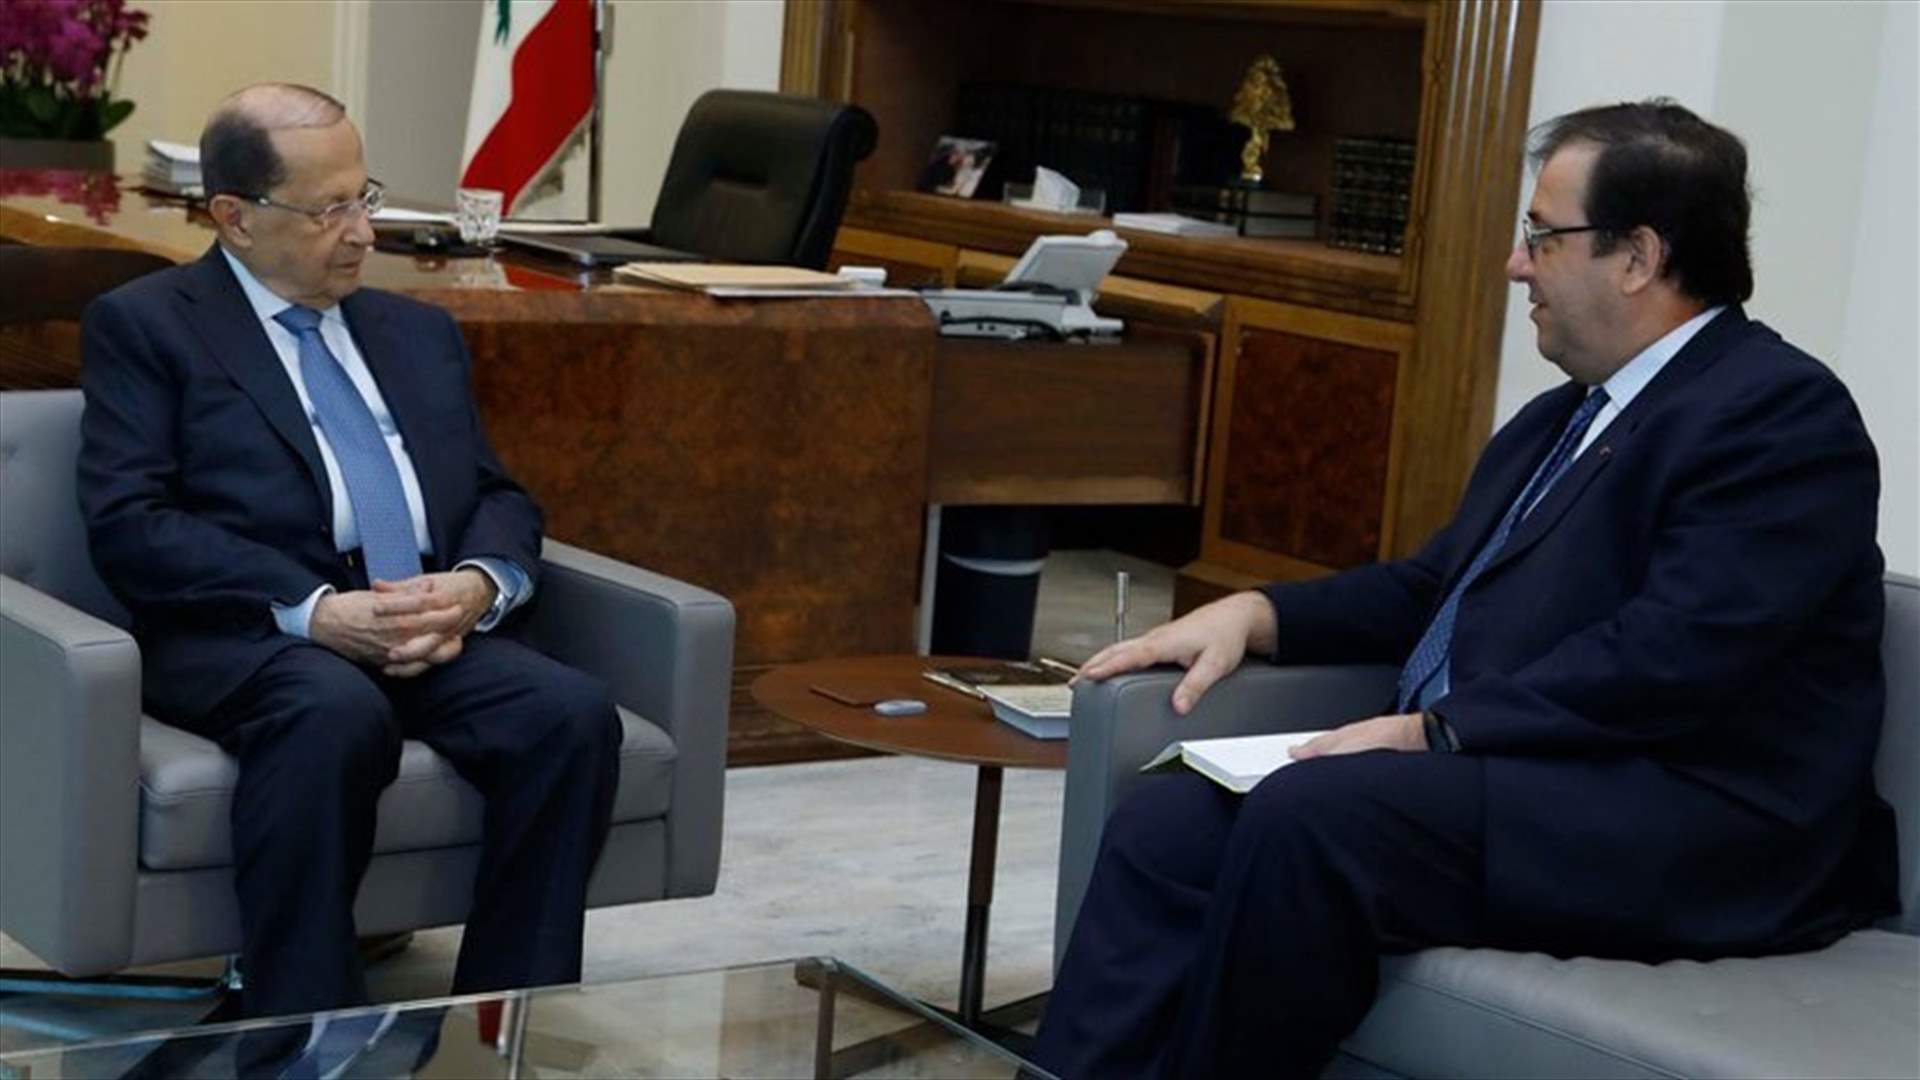 Aoun meets Foucher, Le Drian to visit Lebanon after elections